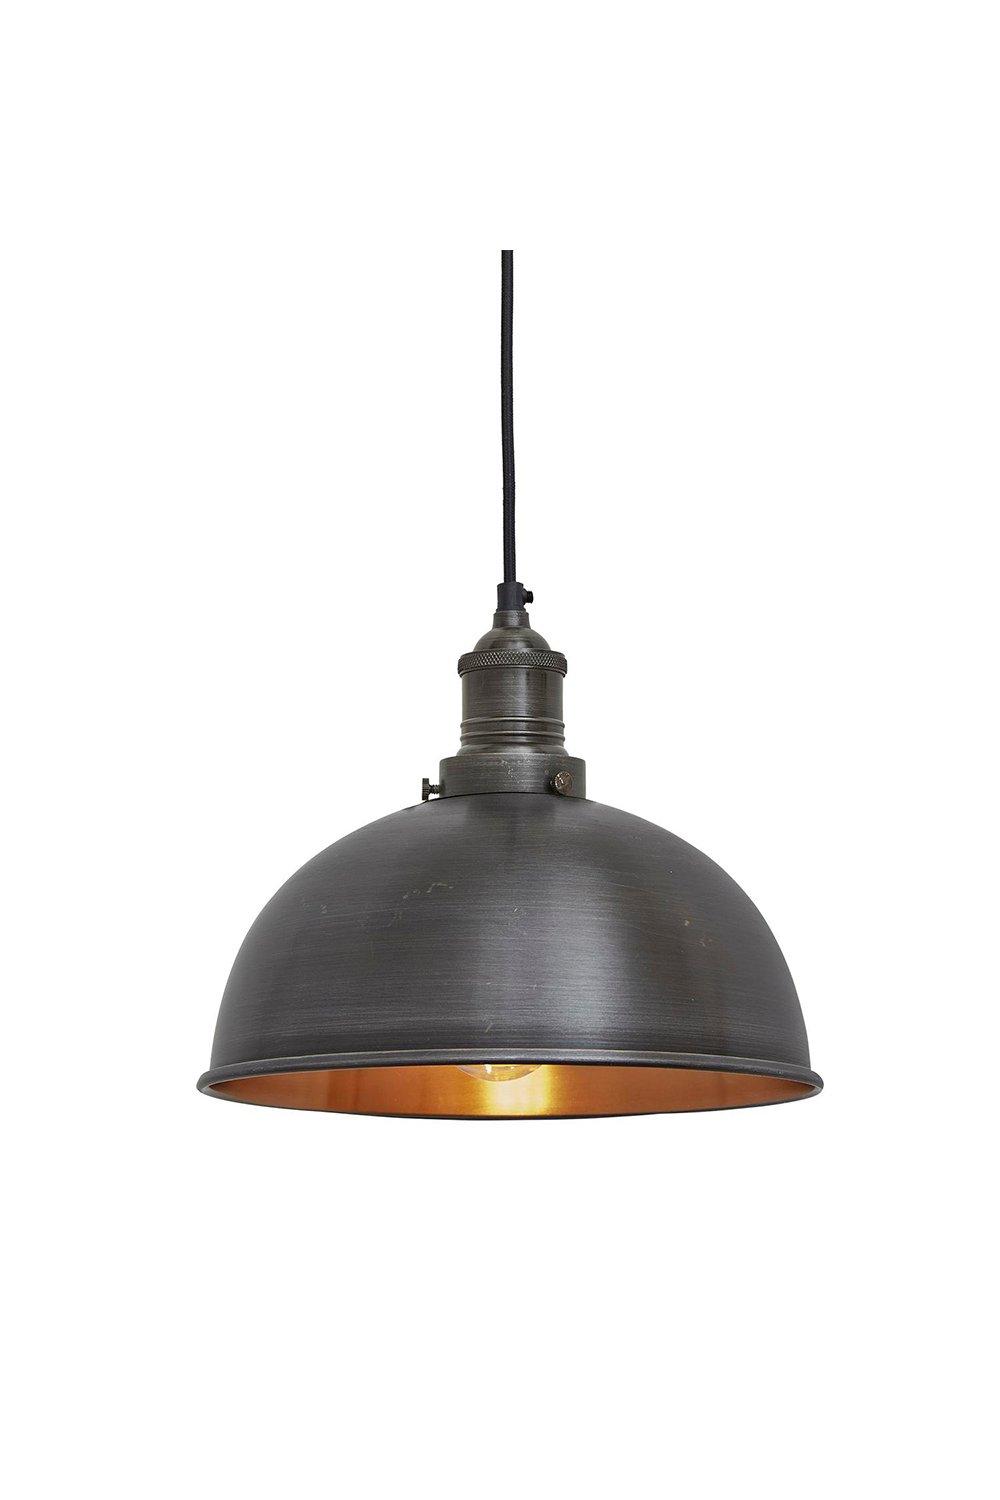 Brooklyn Dome Pendant, 8 Inch, Pewter & Copper, Pewter Holder